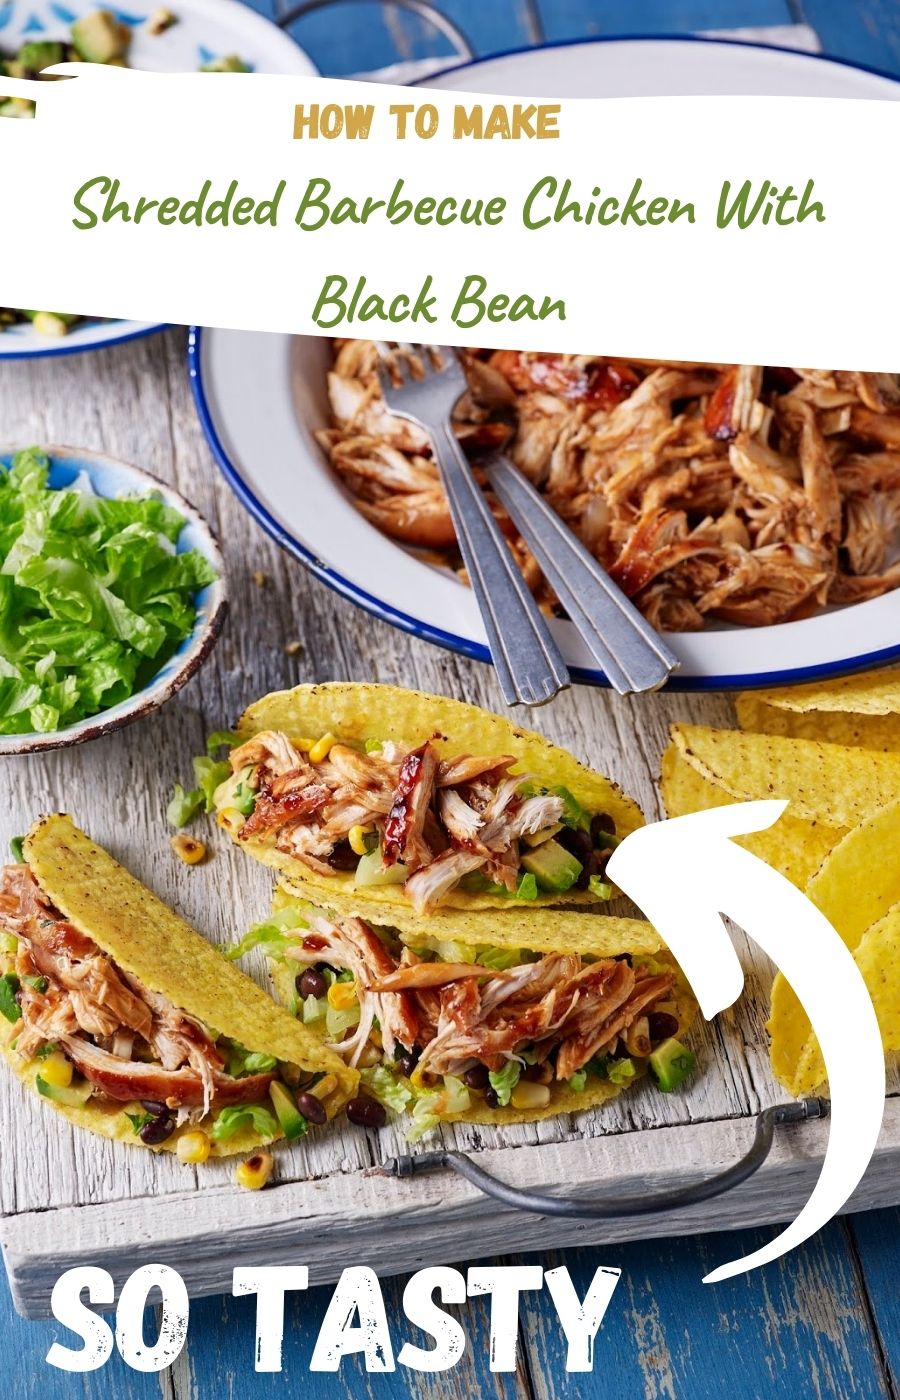 Shredded Barbecue Chicken With Black Bean